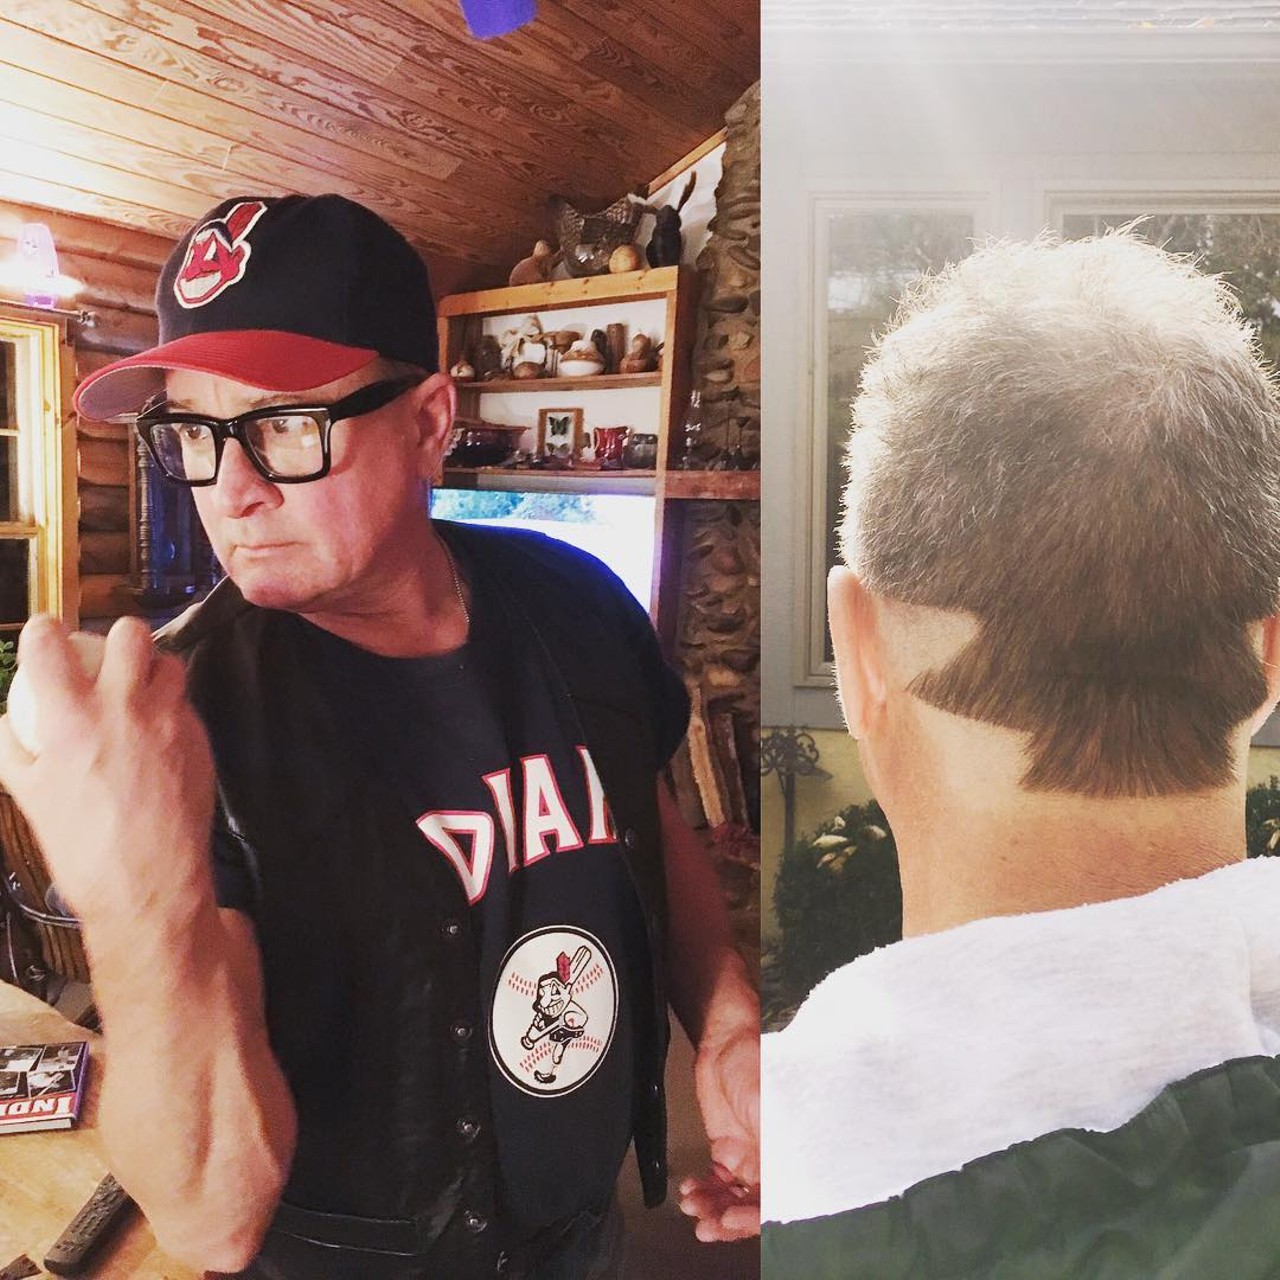 The Wild Thing Knockoff
While this look does prove dedication, unless you're Charlie Sheen, it's near impossible to pull off.
Photo via jopremcak/Instagram